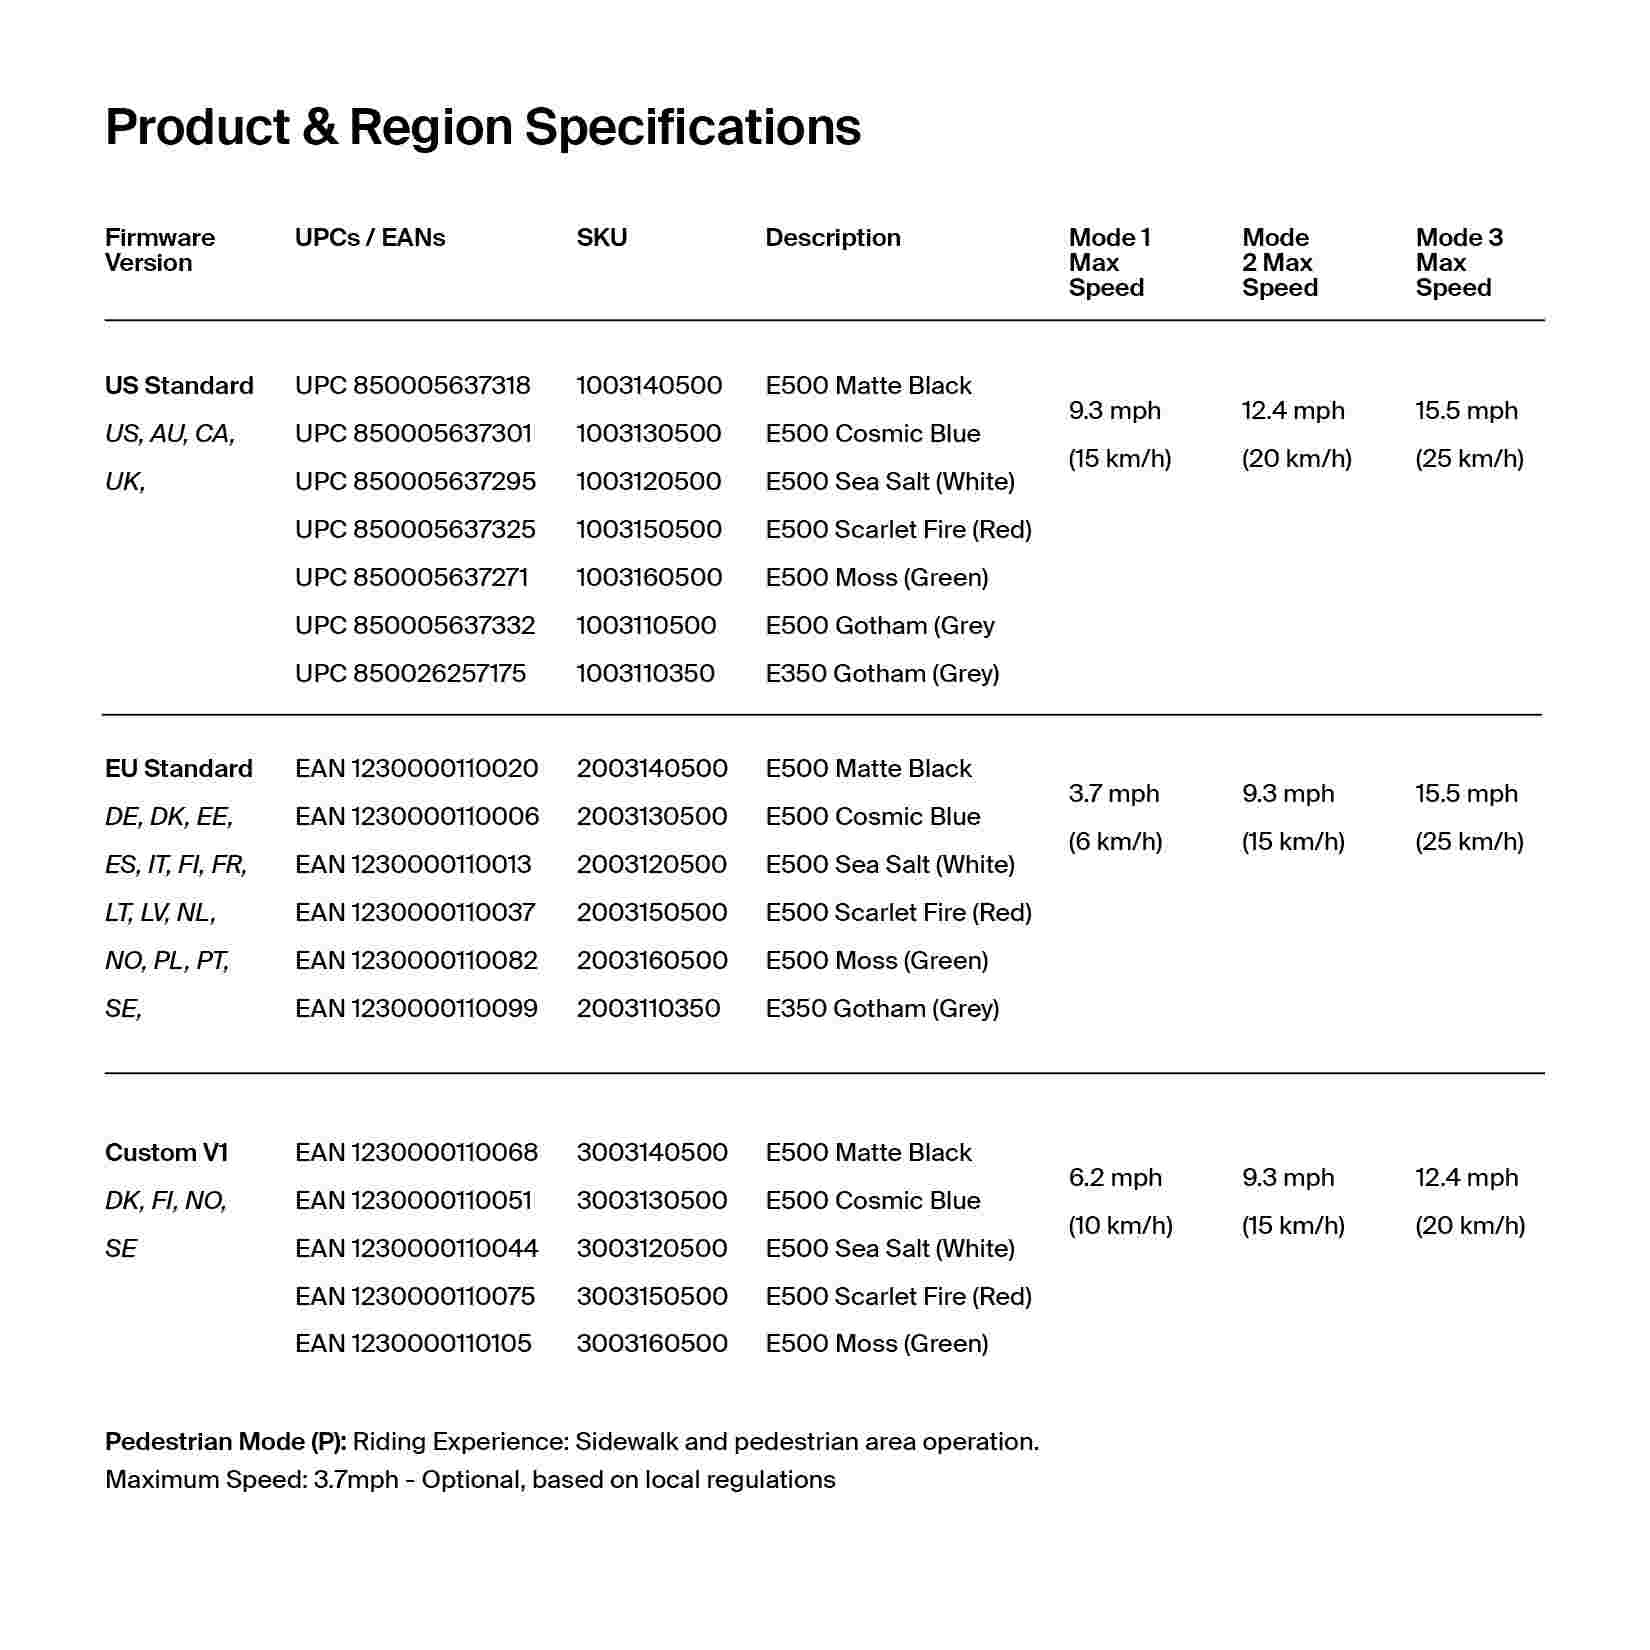 Product & Region Specifications